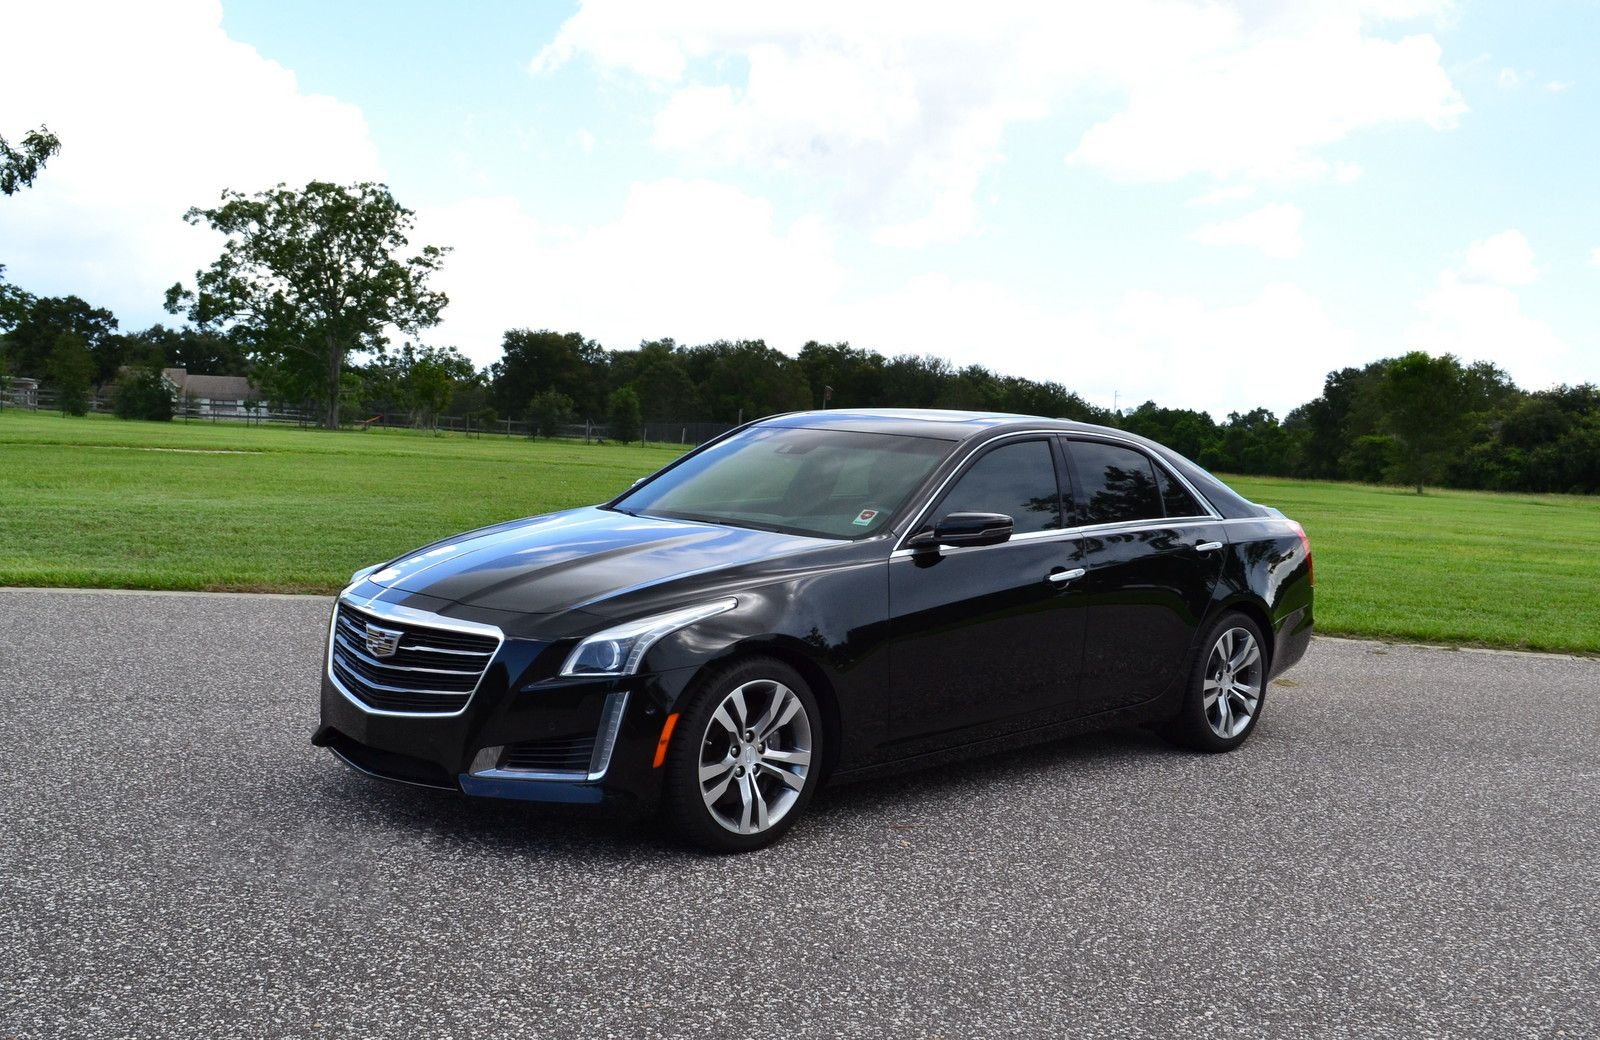 2016 Cadillac CTS | PJ's Auto World Classic Cars for Sale